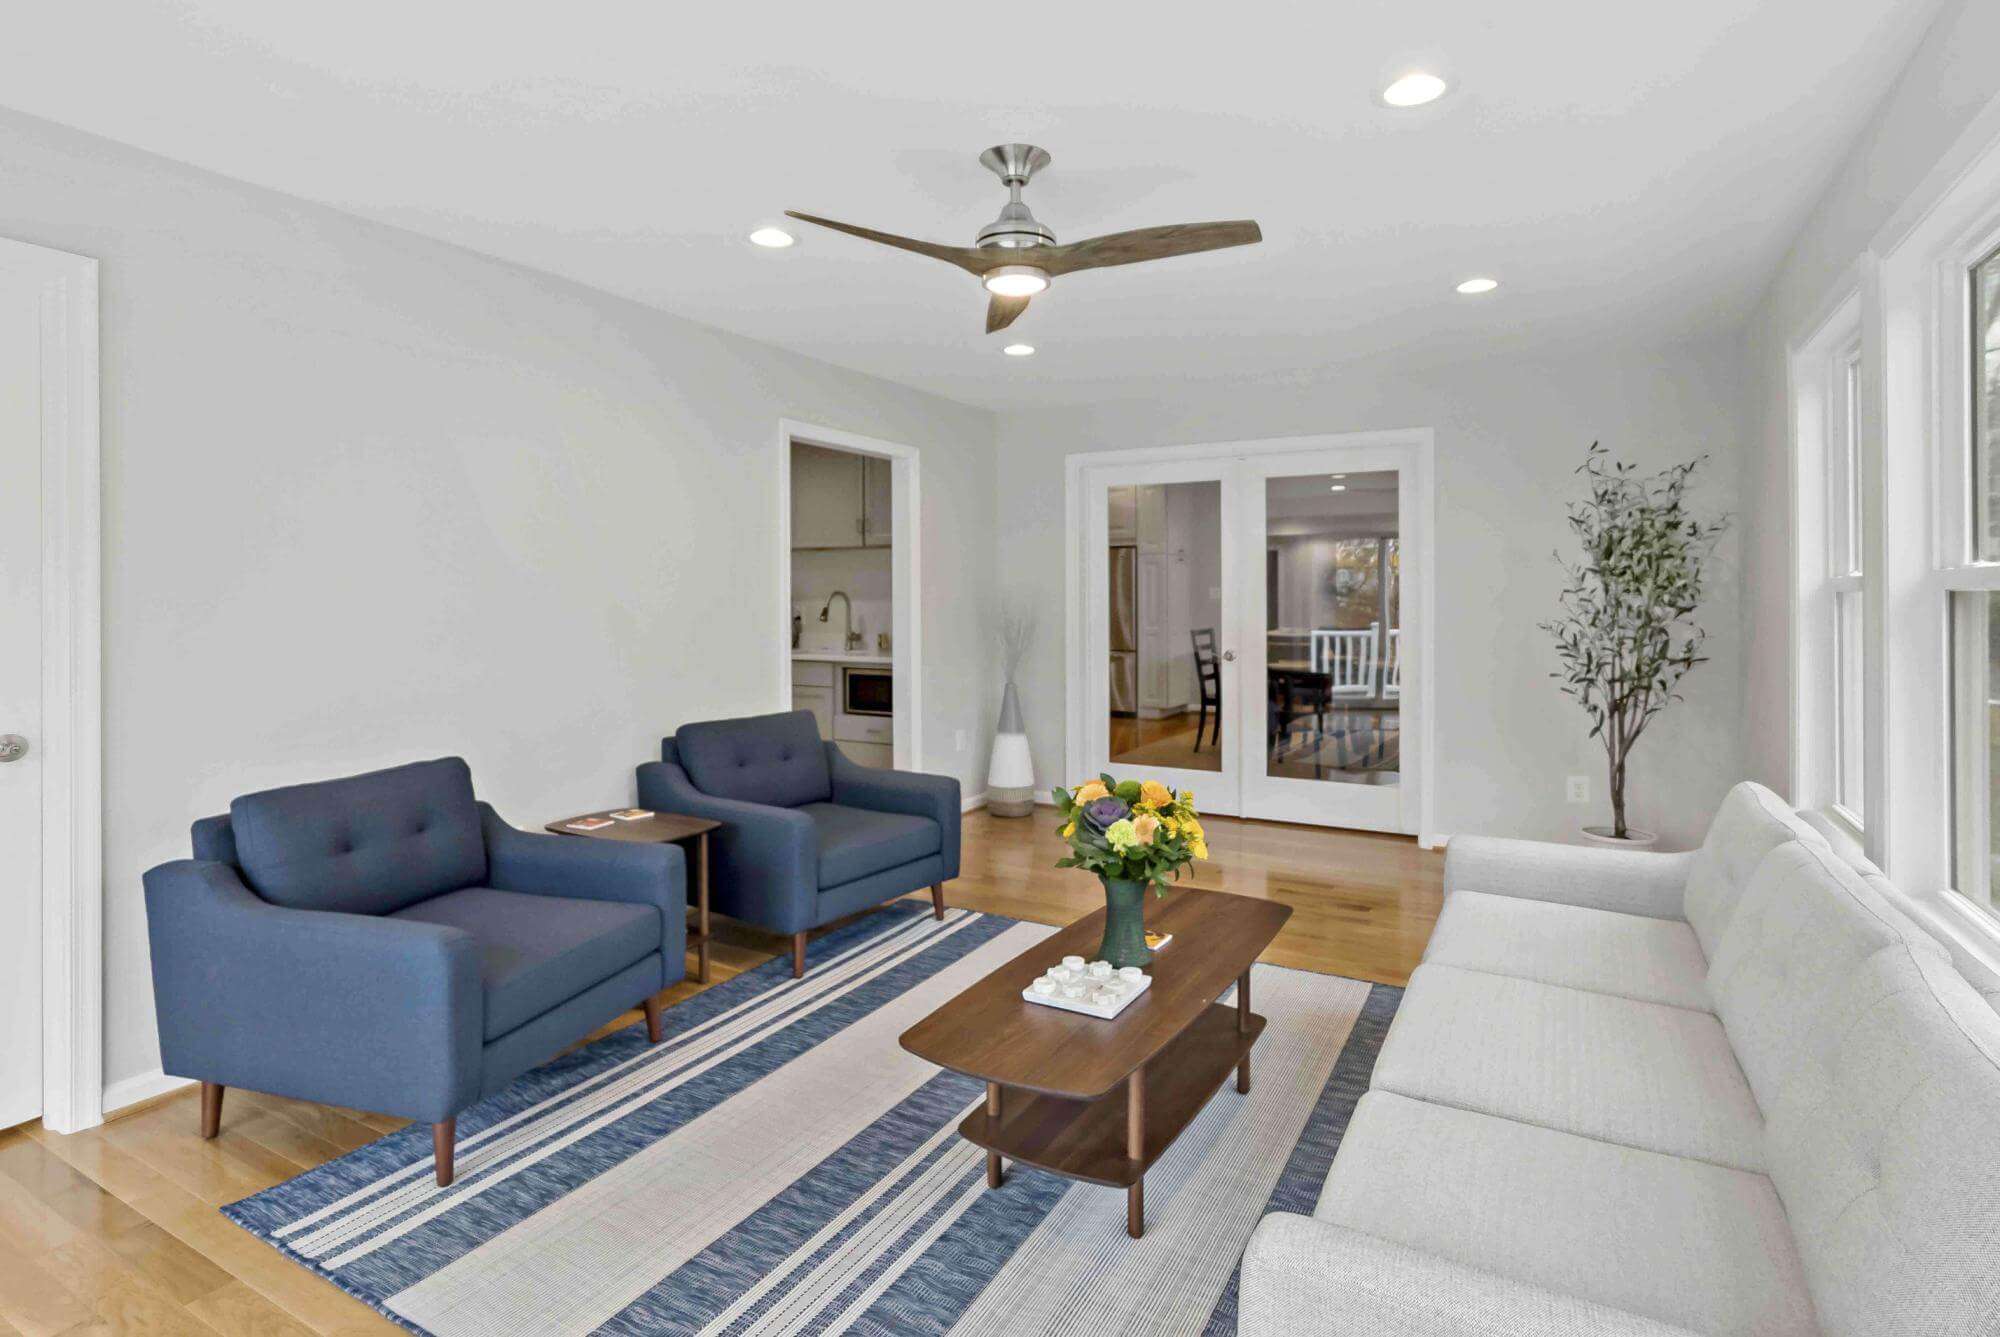 Sitting area with ceiling fan and white walls